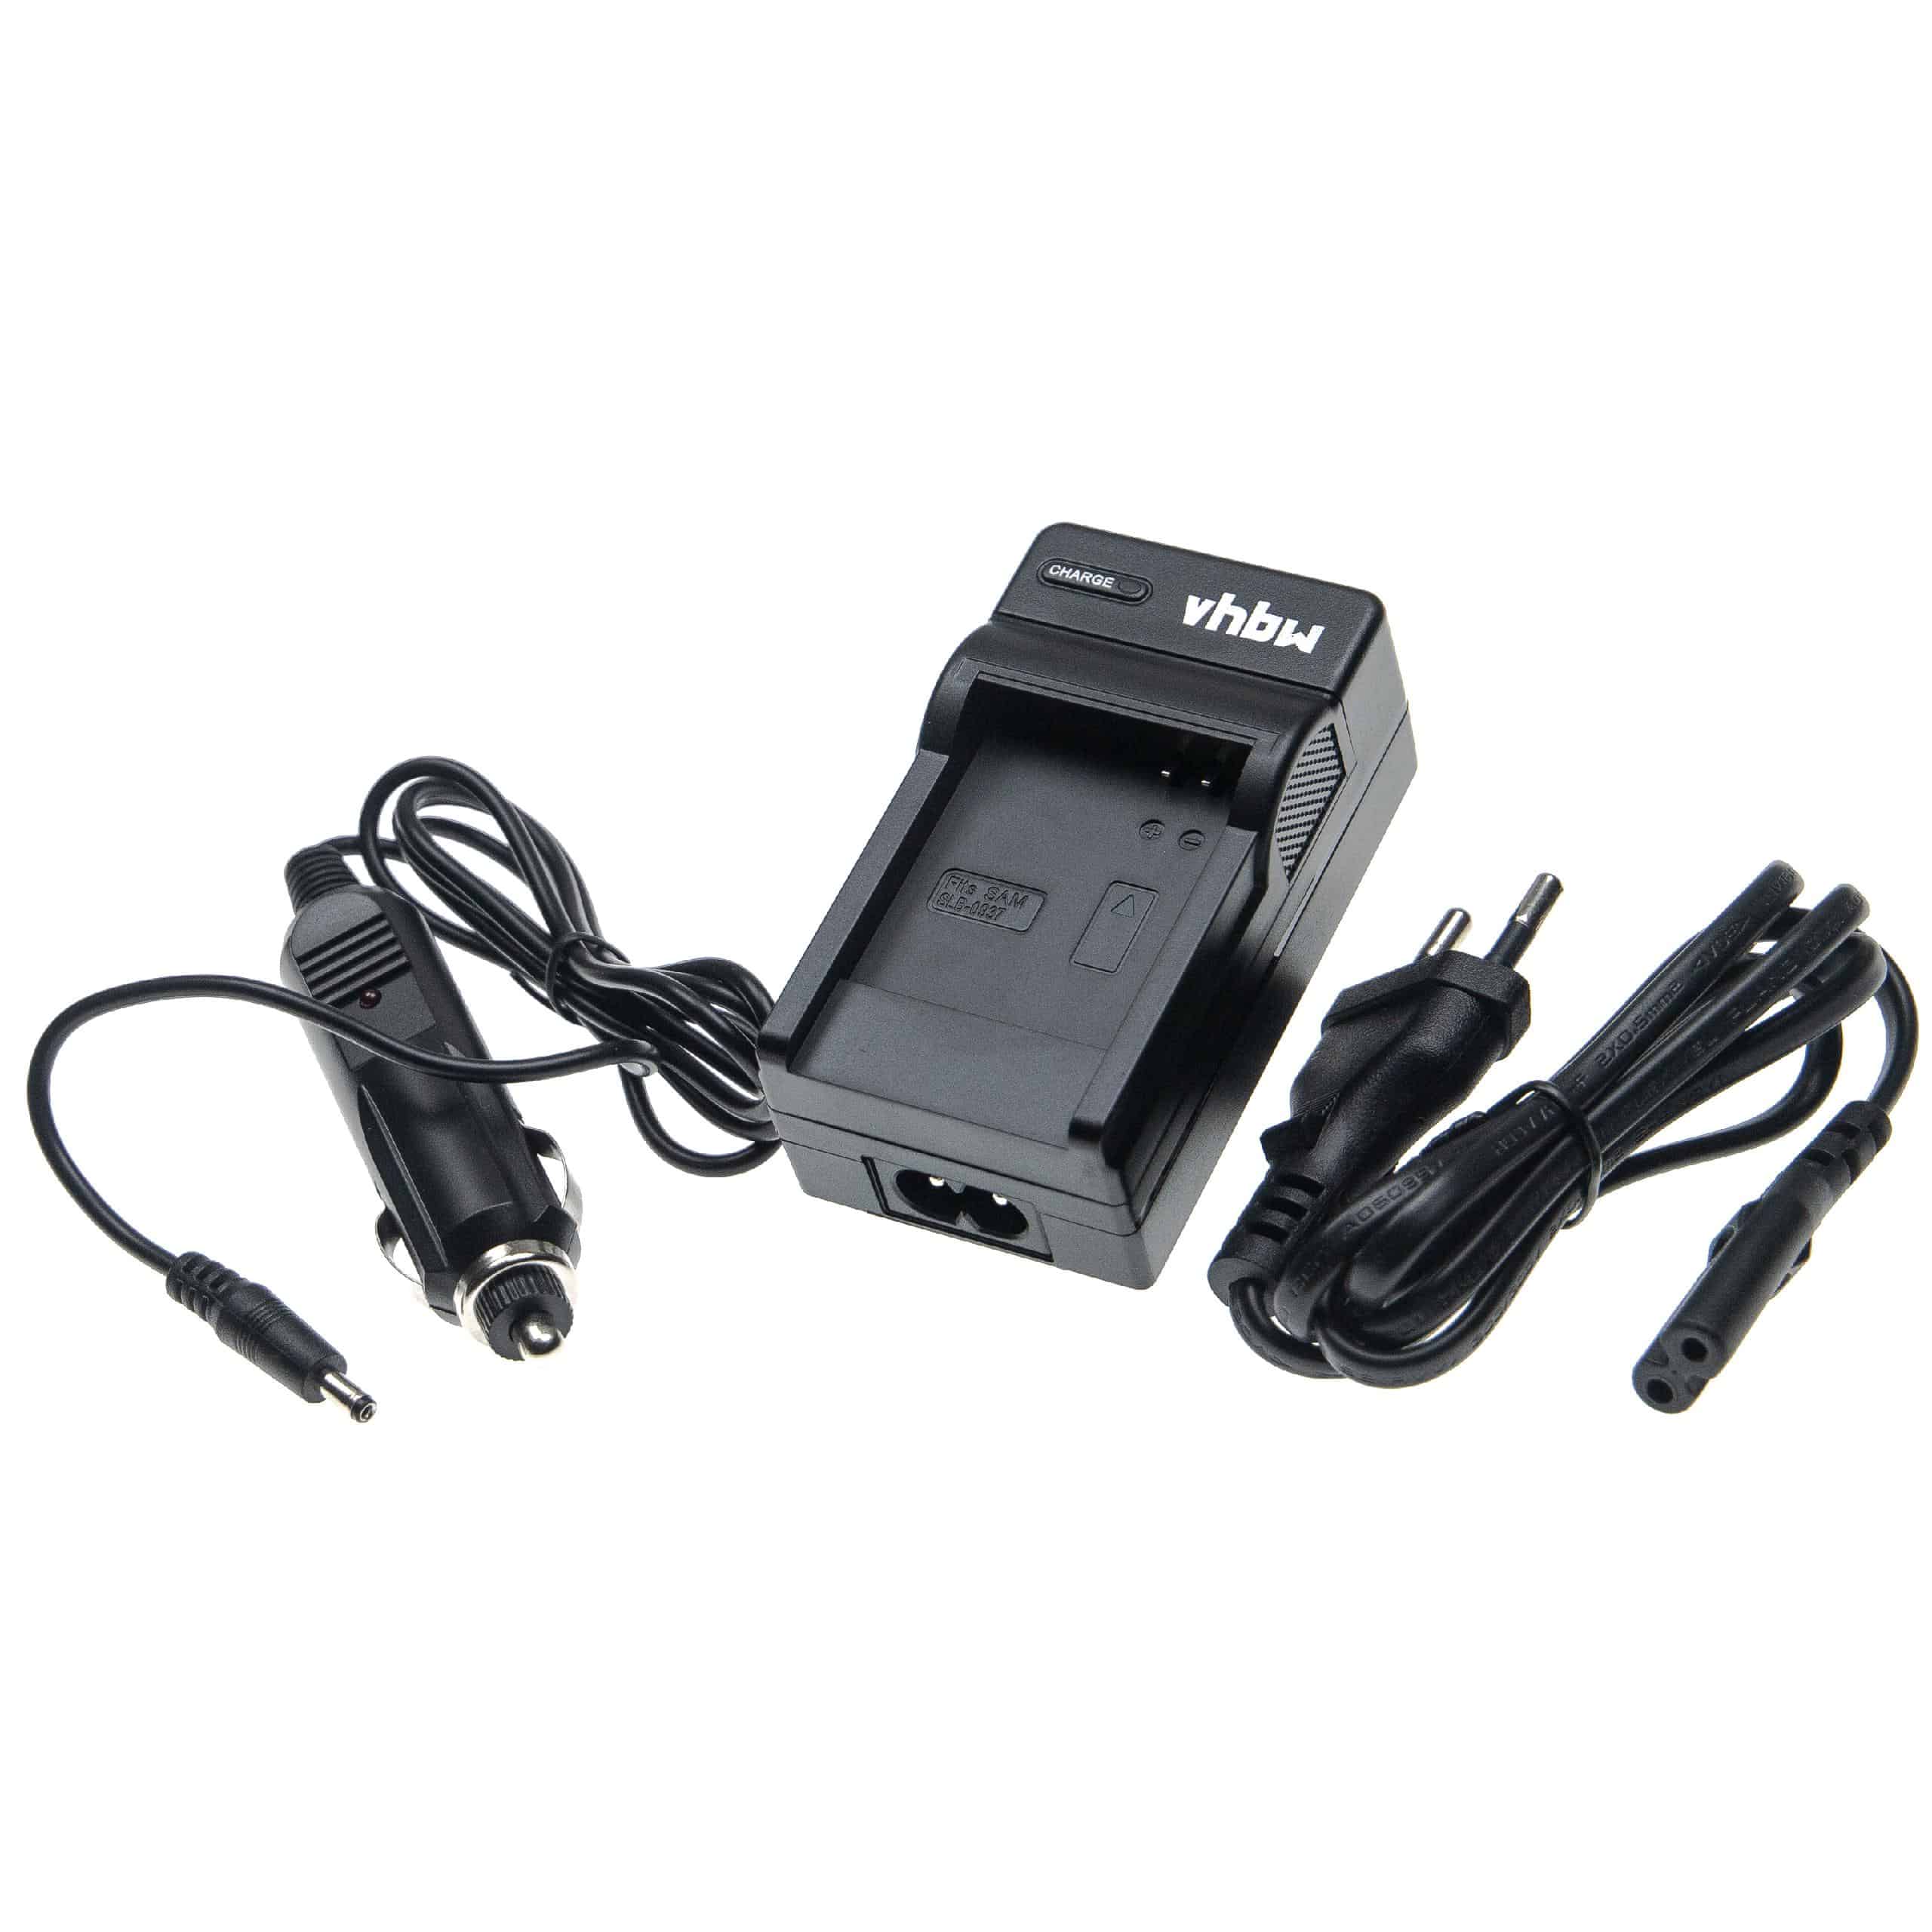 Battery Charger suitable for Samsung SLB-0937 Camera etc. - 0.6 A, 4.2 V